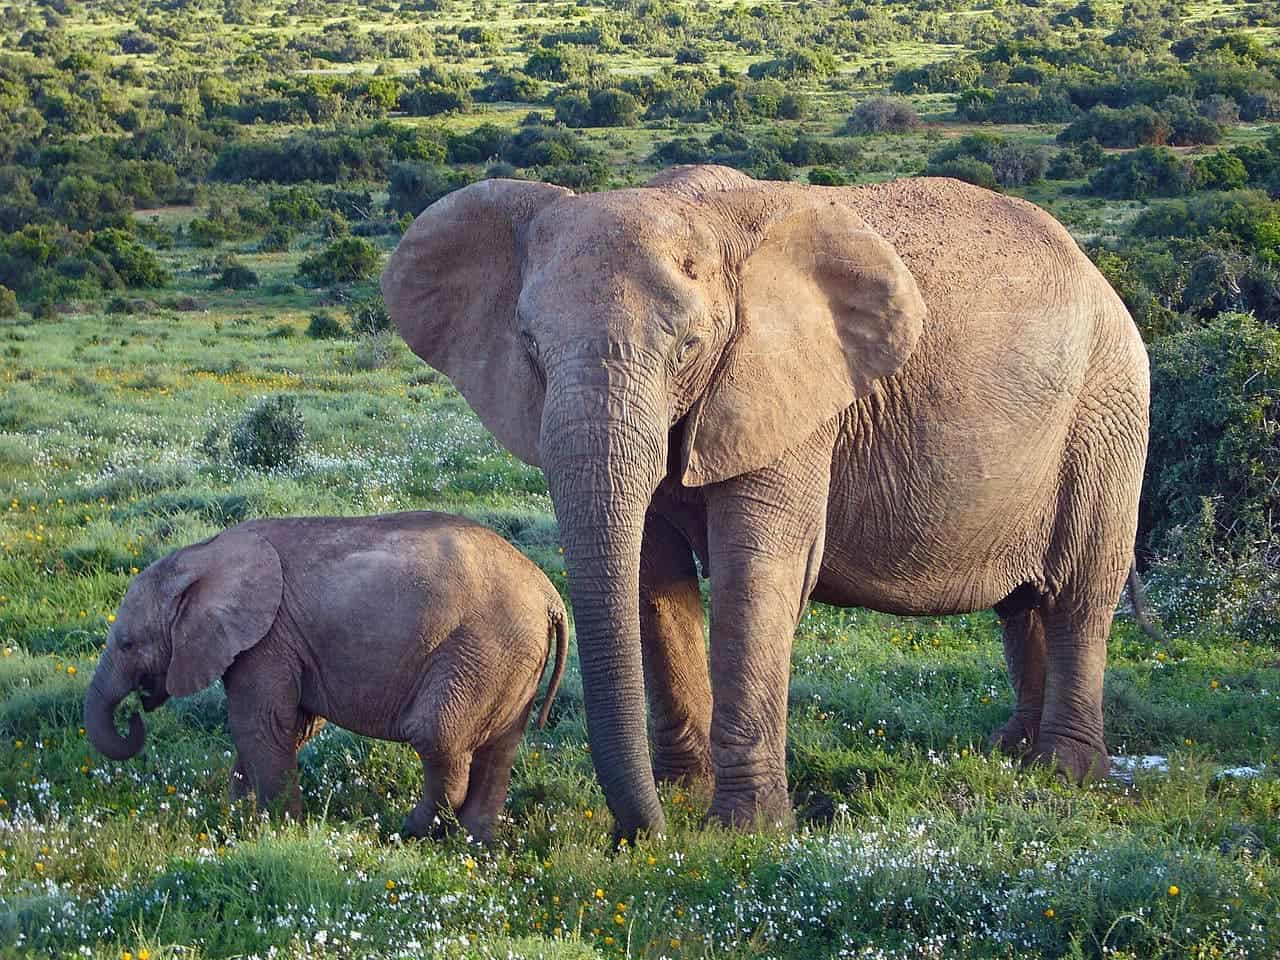 Elephants have advanced social help networks for orphans of their group